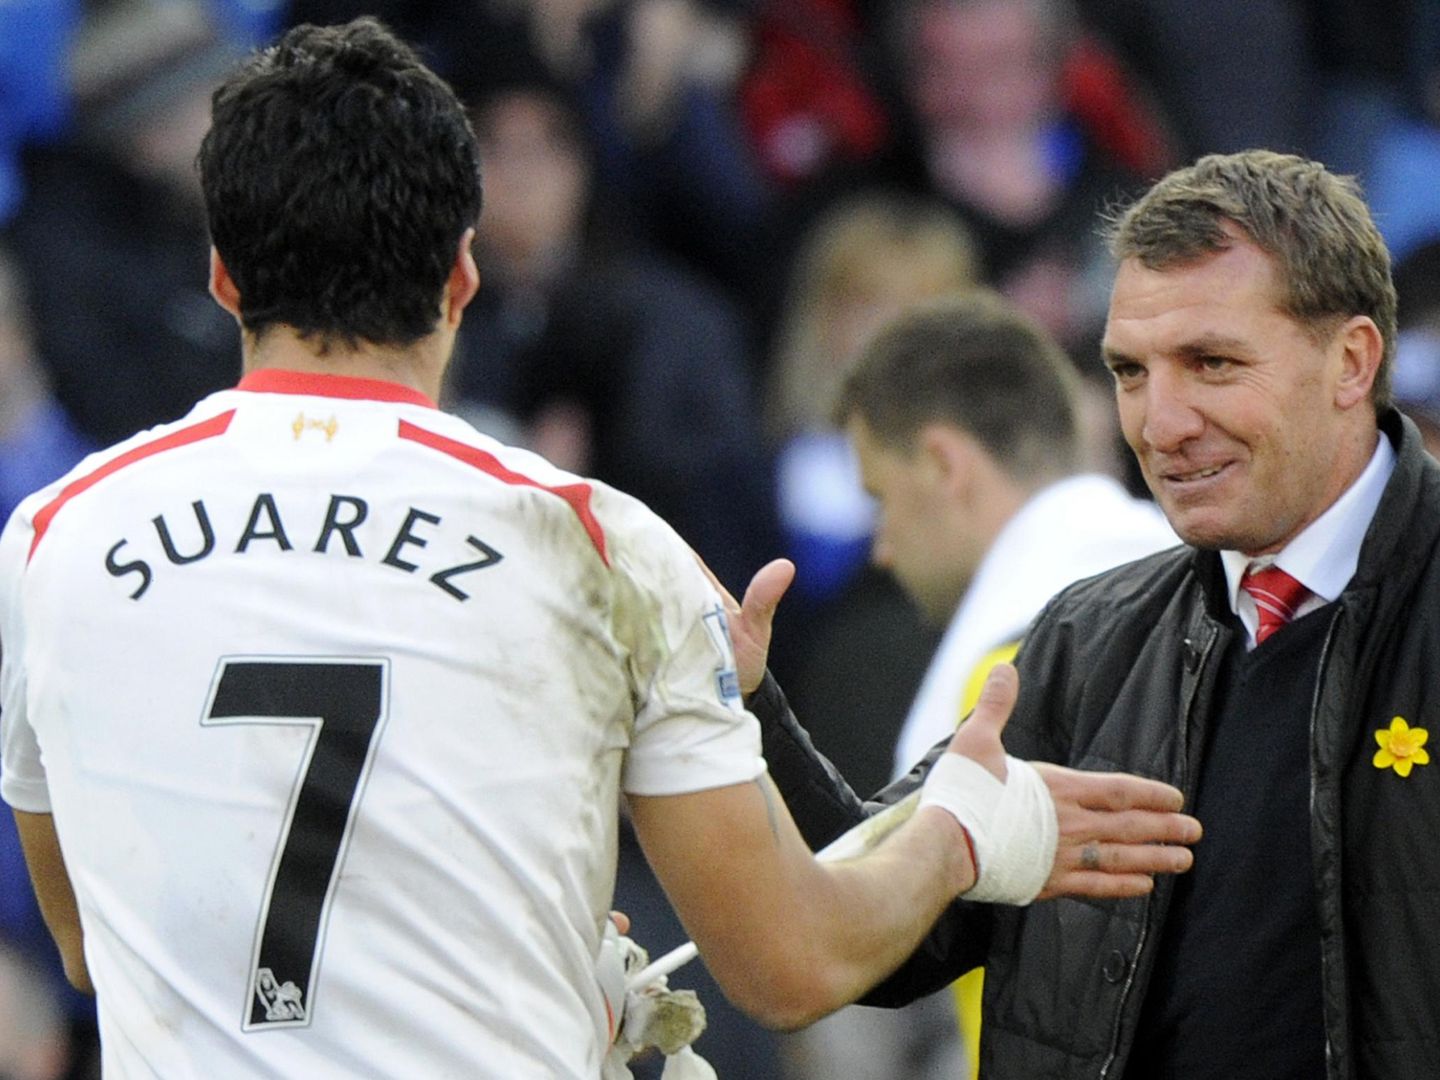 Liverpool's manager rodgers congratulates suarez after scoring a hat trick against cardiff city during their english premier league soccer match at cardiff city stadium